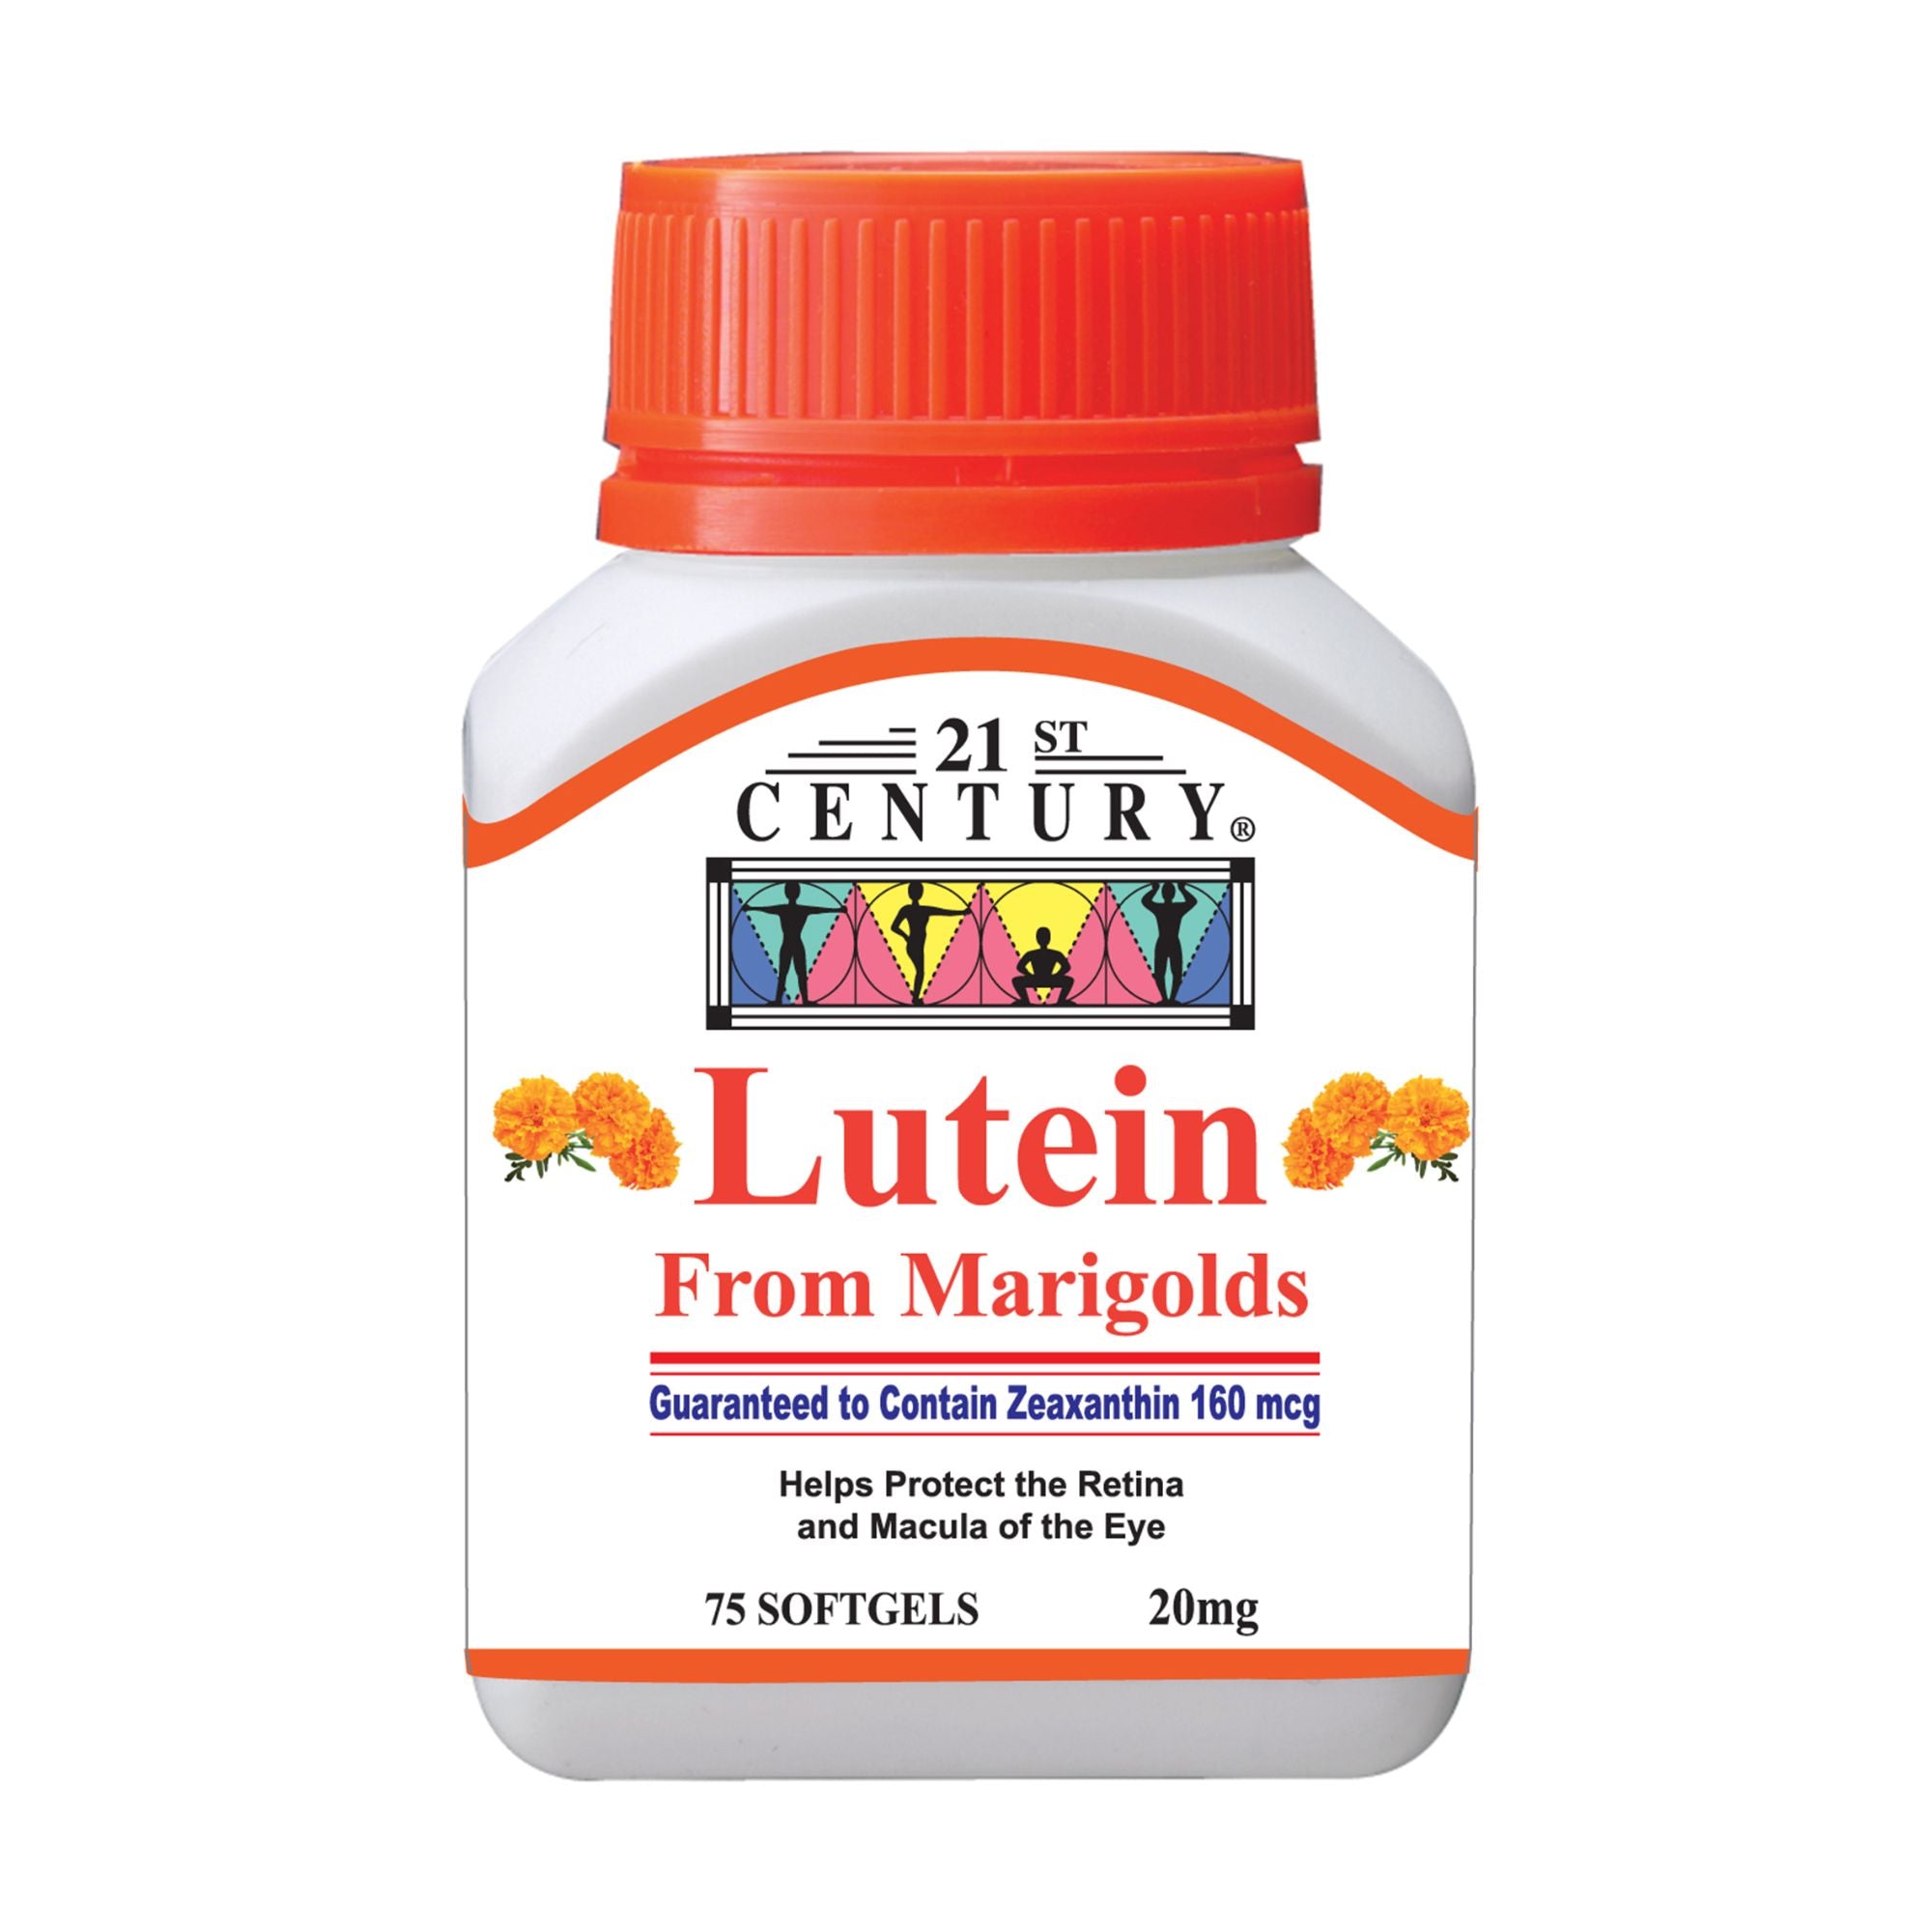 21ST CENTURY Lutein from Marigolds 20mg 75 Softgels